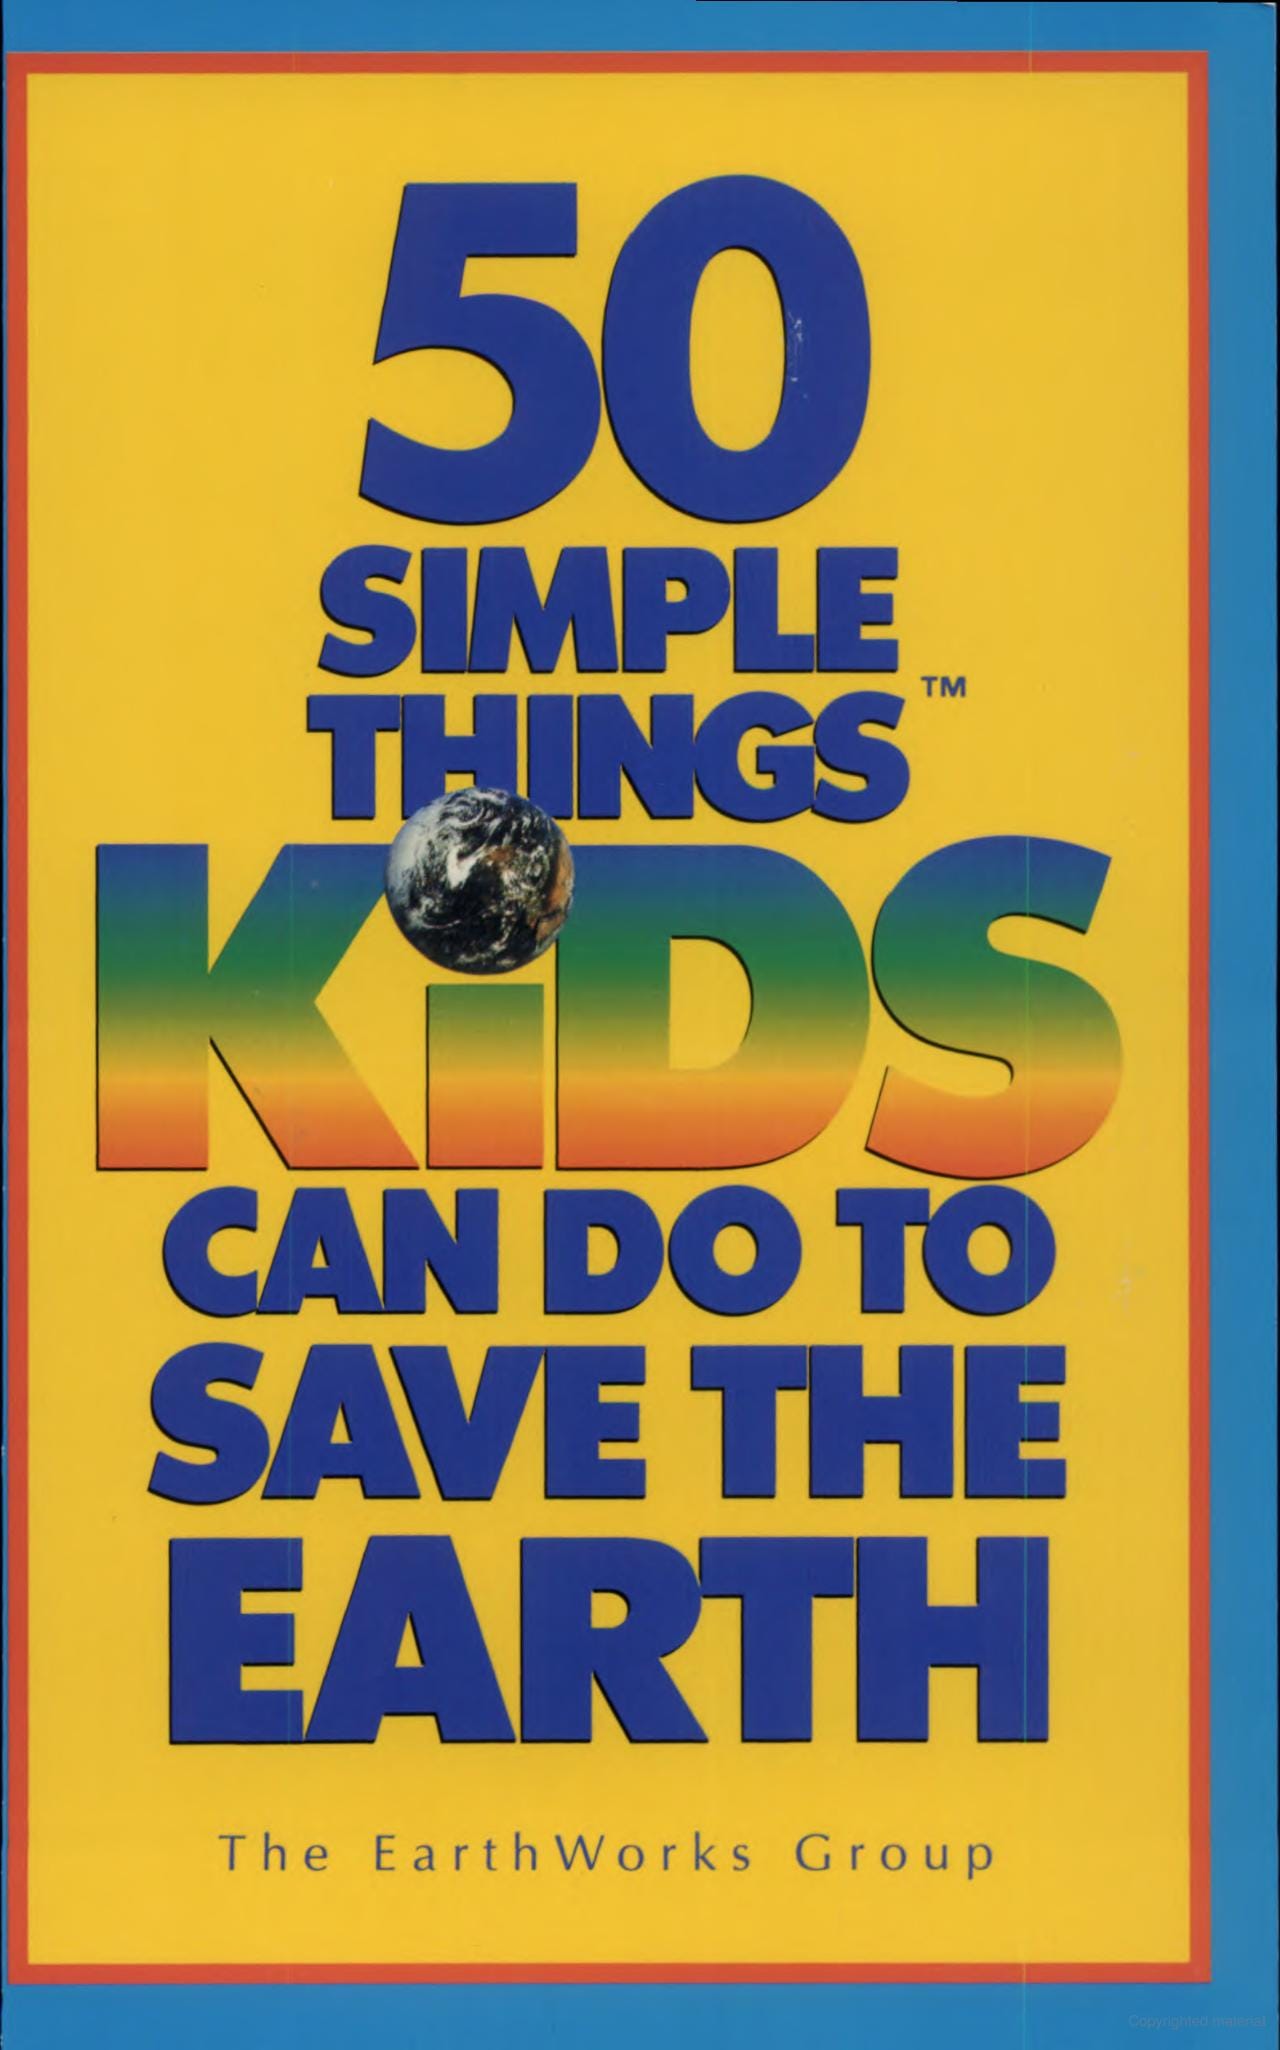 A cover of the 1990s "50 Simple Things Kids Can Do to Save the Earth"